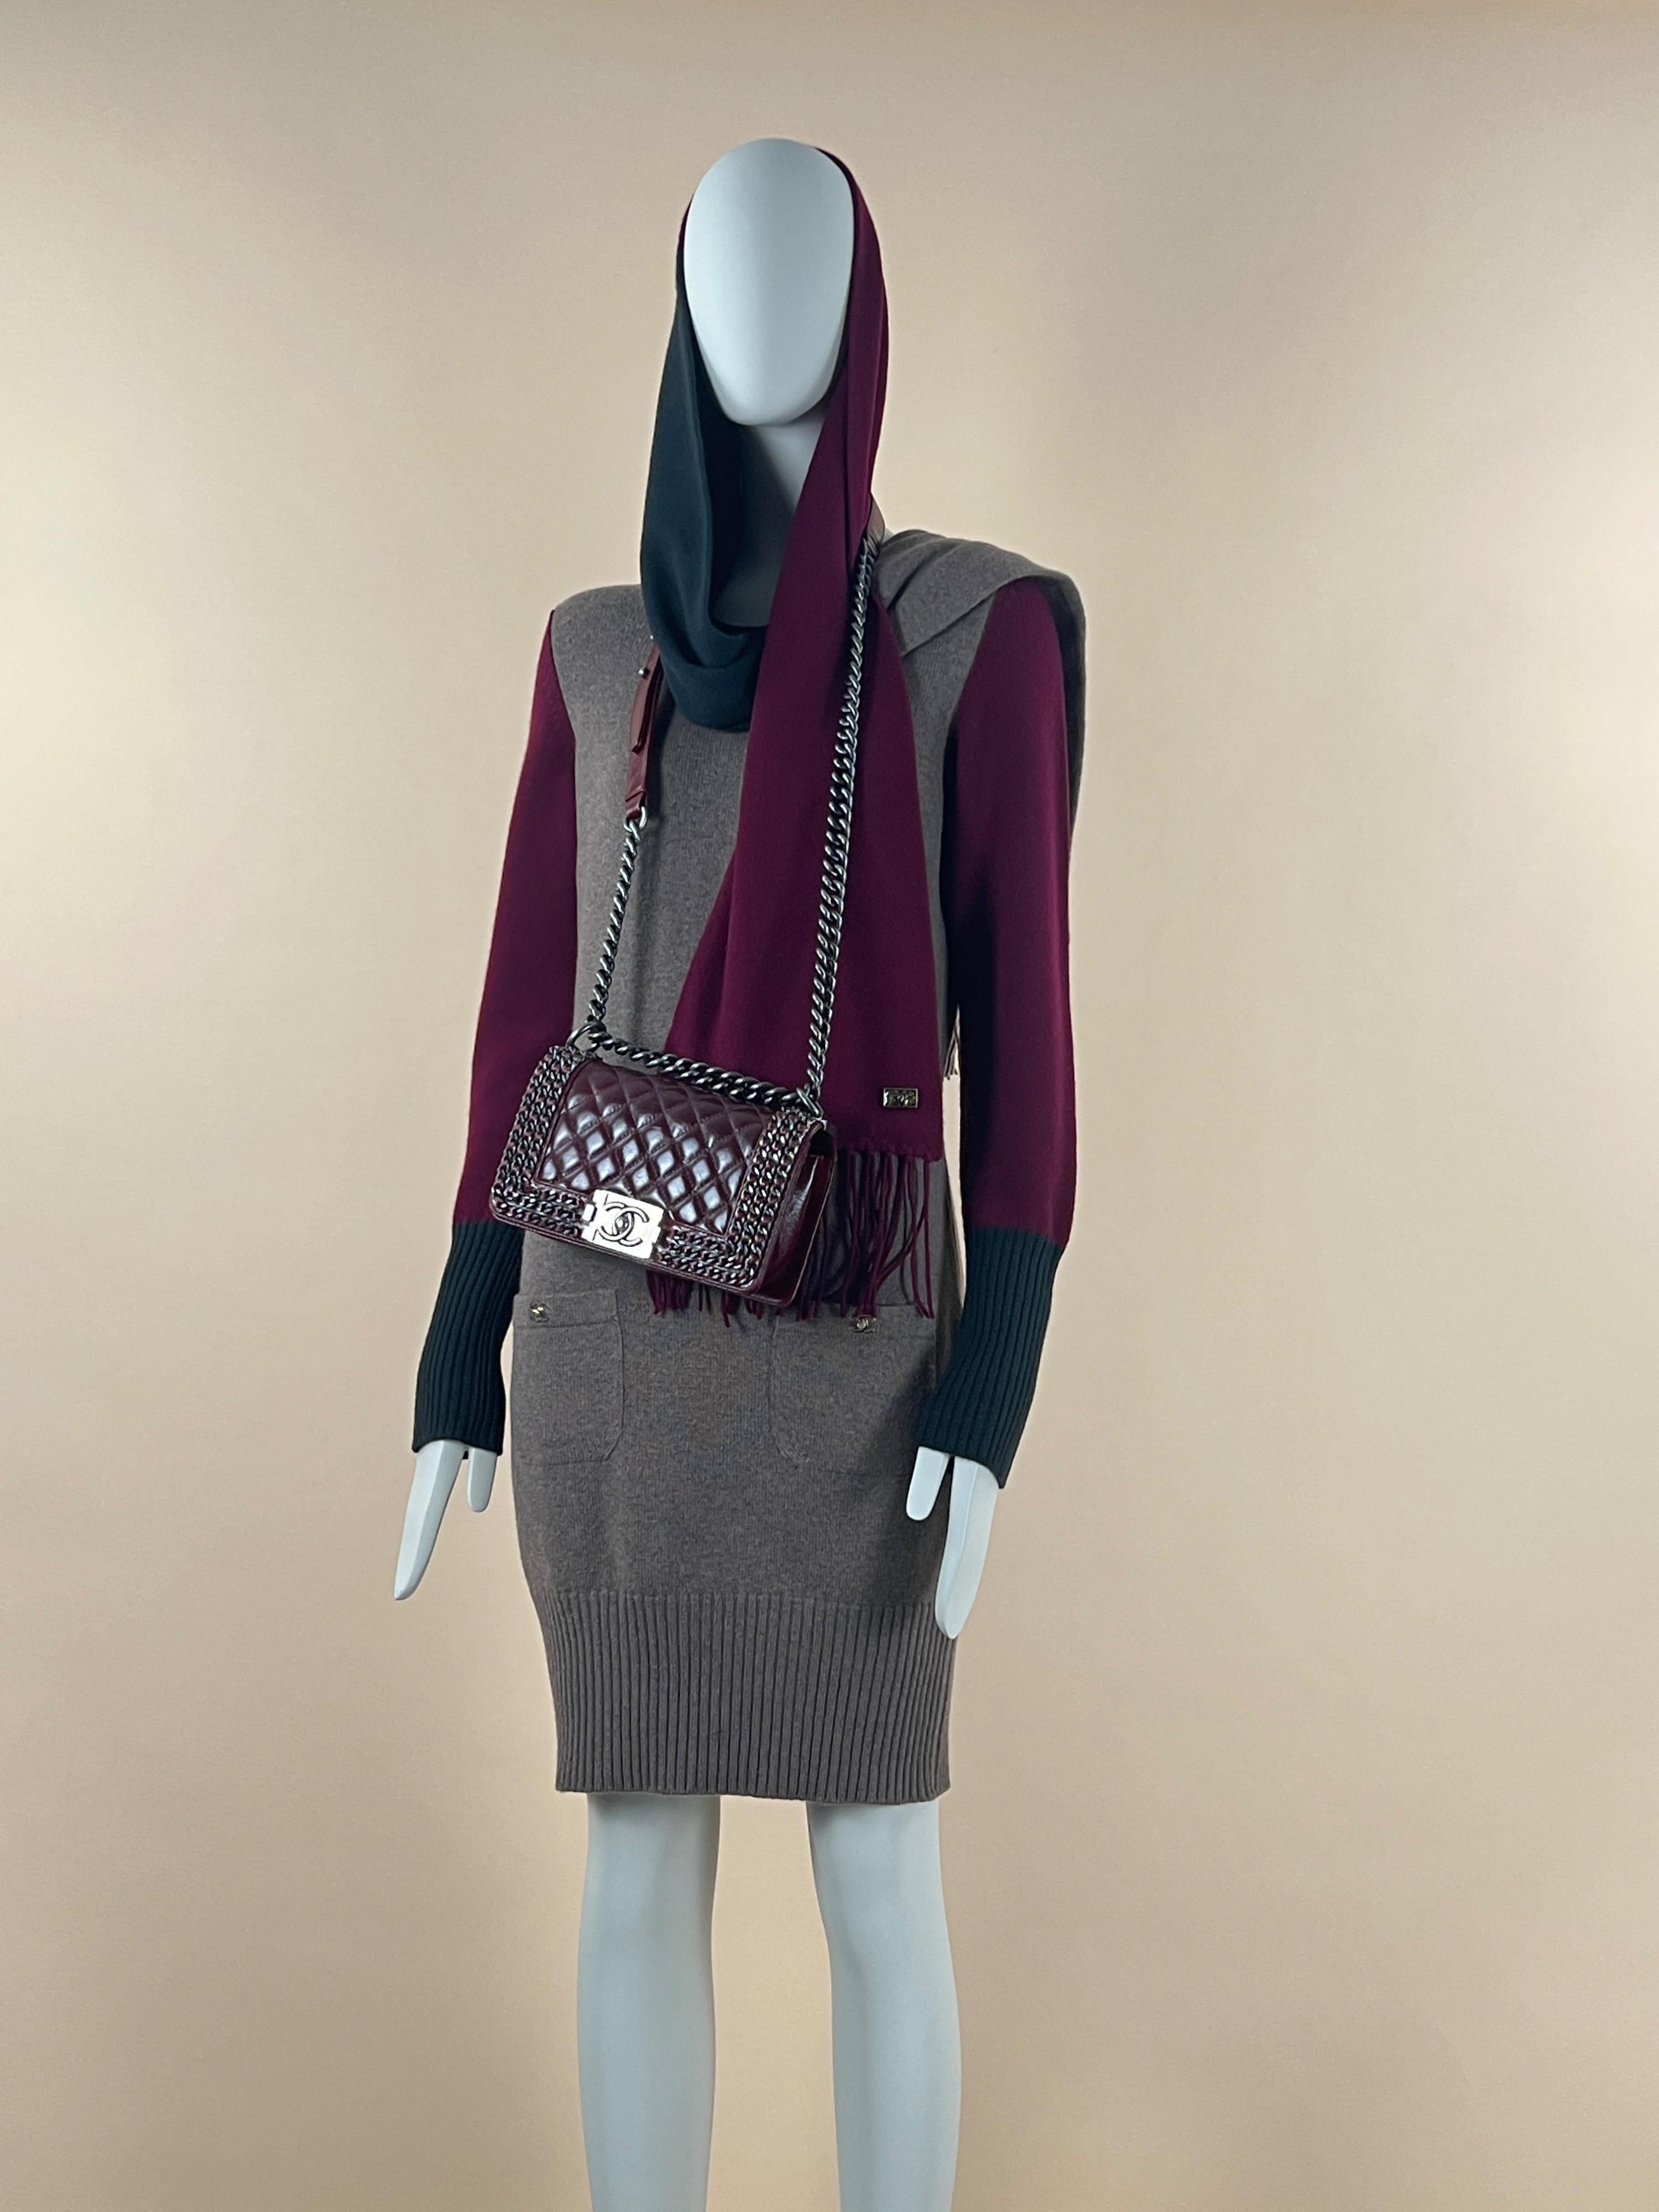 New Chanel cashmere set - dress with CC turnlocks at pockets and large wrap scarf with CC logo charm.
- made of pure 100% cashmere in beige, burgundy and emerald colour
Size mark 36 fr.
